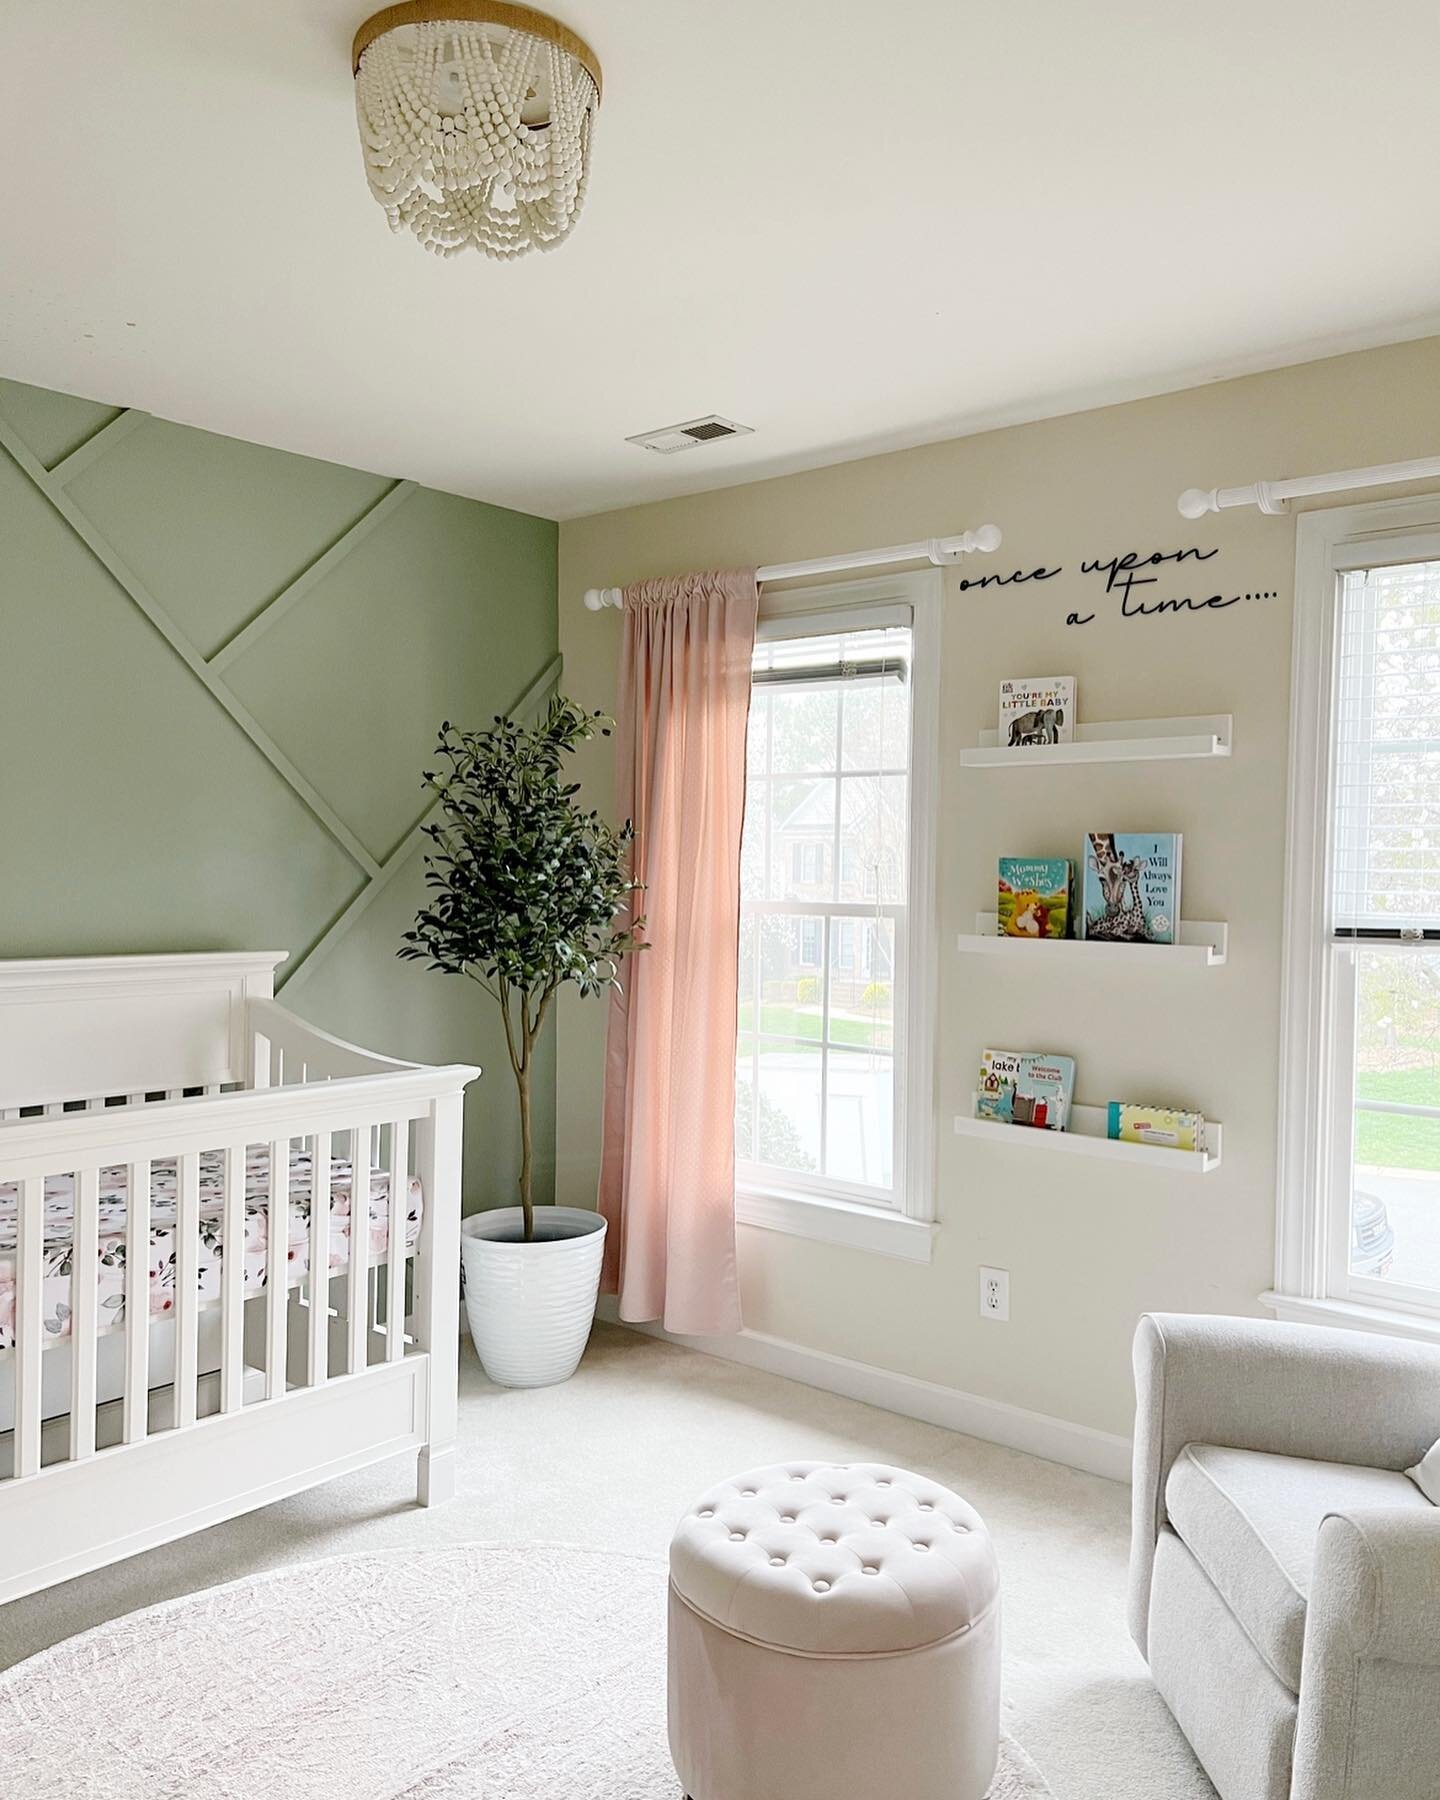 An actual static photo! 🙌🏼 In a world of reels and videos, it&rsquo;s nice to bring it back to just looking at a still picture.
.
Just a little nursery inspo for you on a Monday night 😌 One of my favorite projects to date! DIY Accent Wall and Book